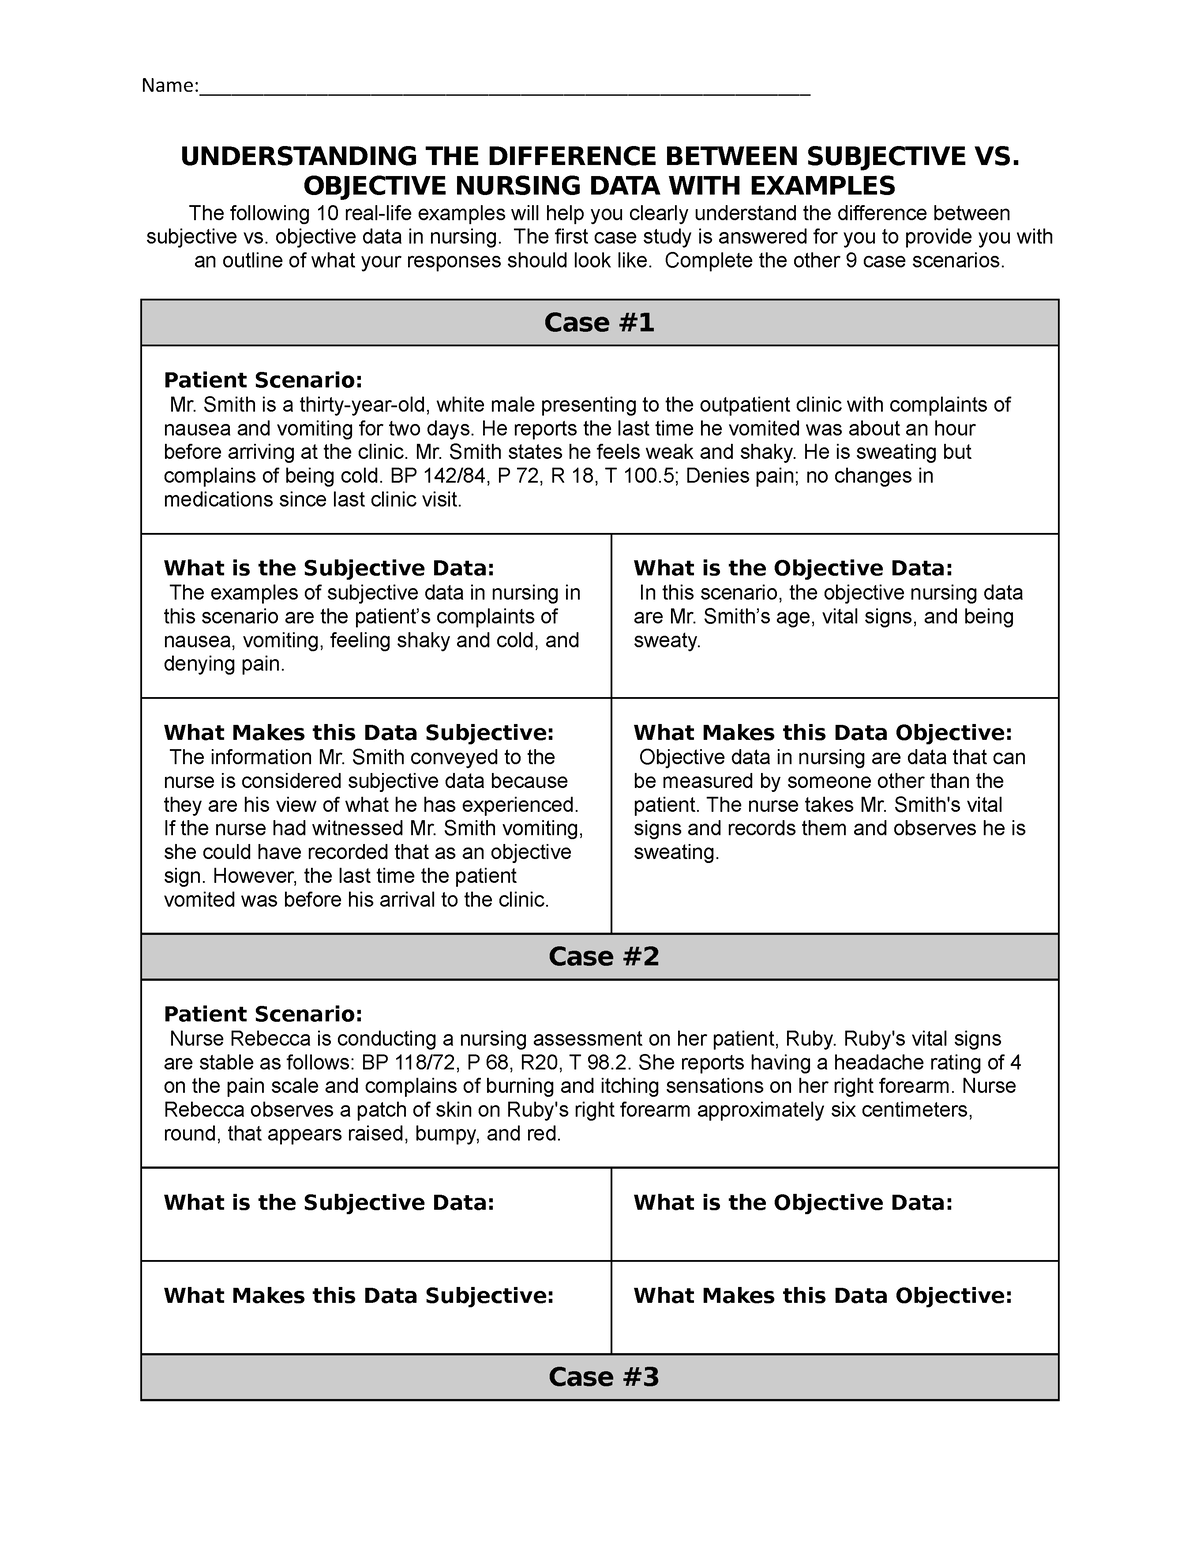 Subjective Vs Objective Worksheet UNDERSTANDING THE DIFFERENCE 